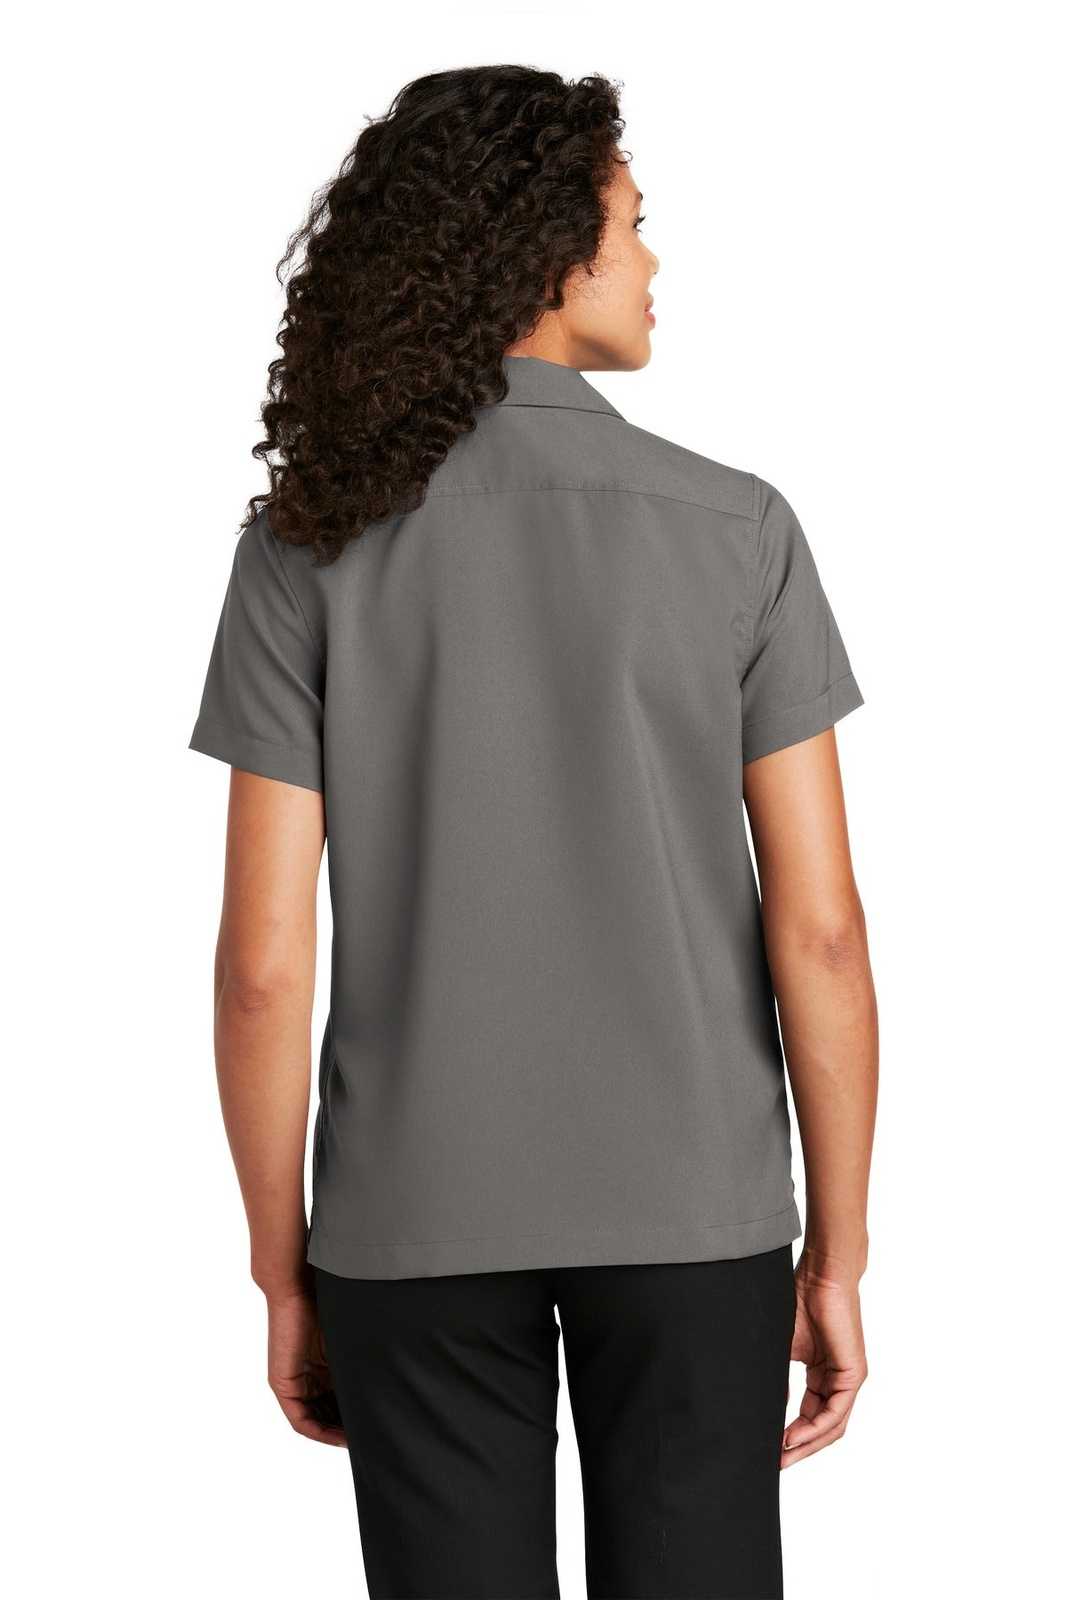 Port Authority LW400 Ladies Short Sleeve Performance Staff Shirt - Graphite - HIT a Double - 1